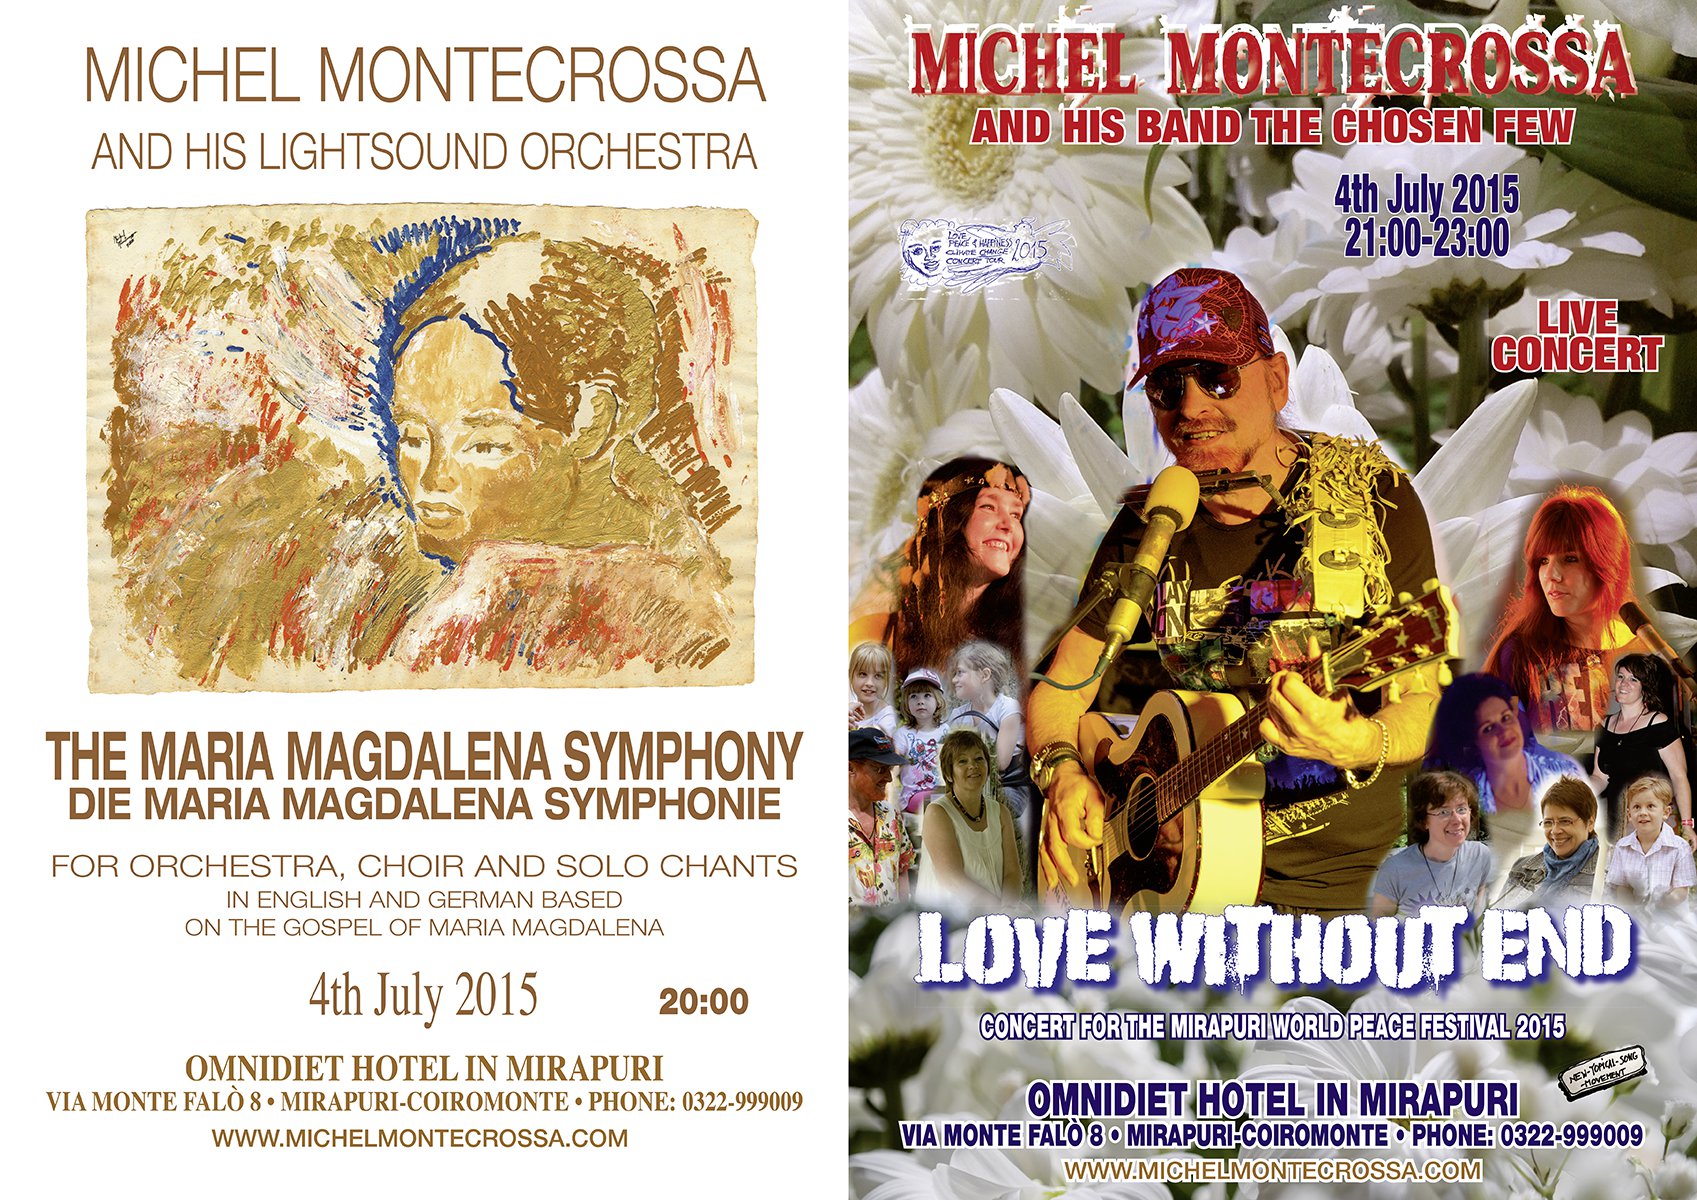 The Maria Magdalena Symphony Concert & The Love Without End Concert